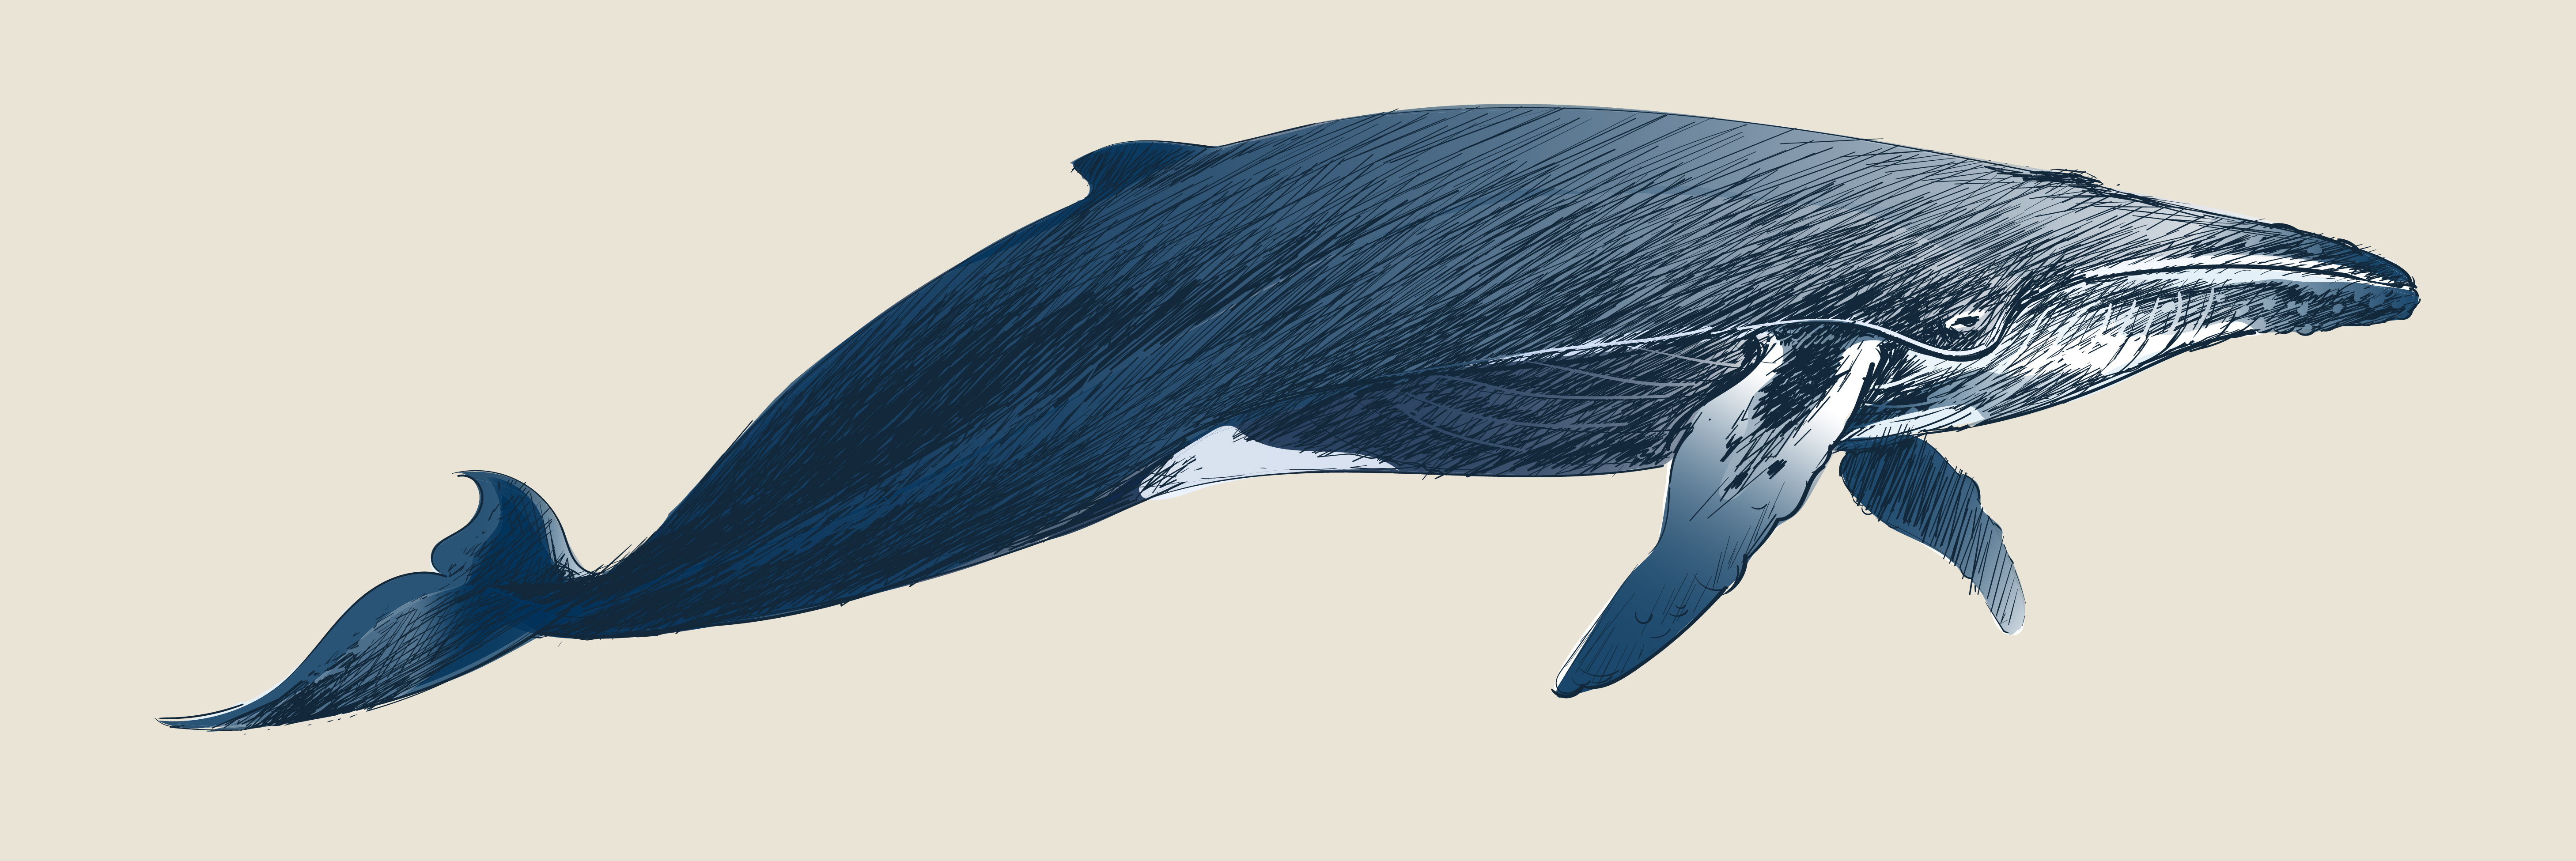 Humpback whale vintage drawing - Download Free Vectors, Clipart